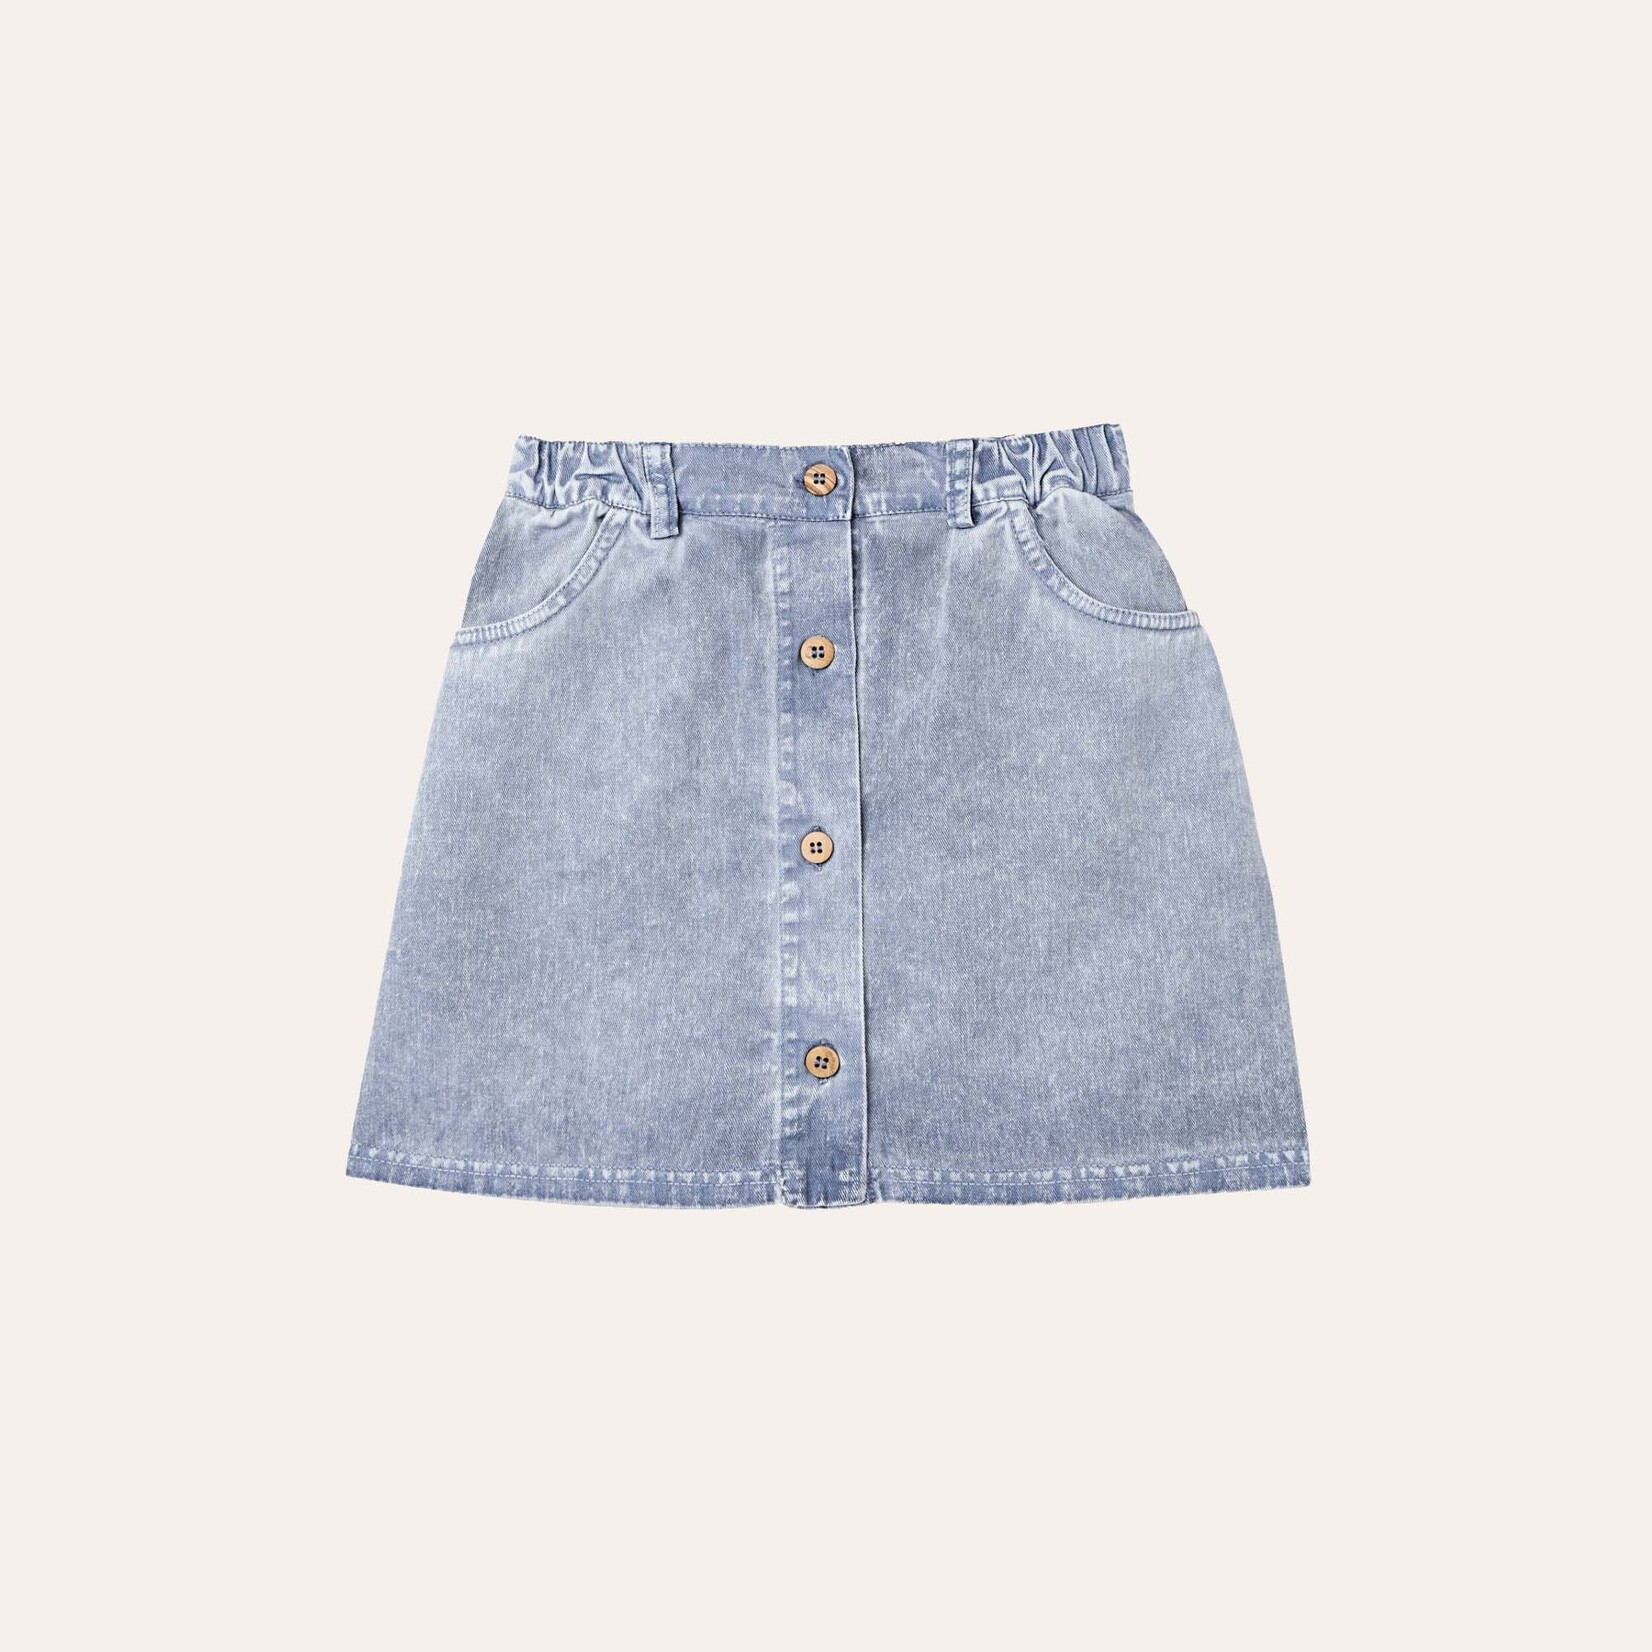 The Campamento Skirt - light blue washed